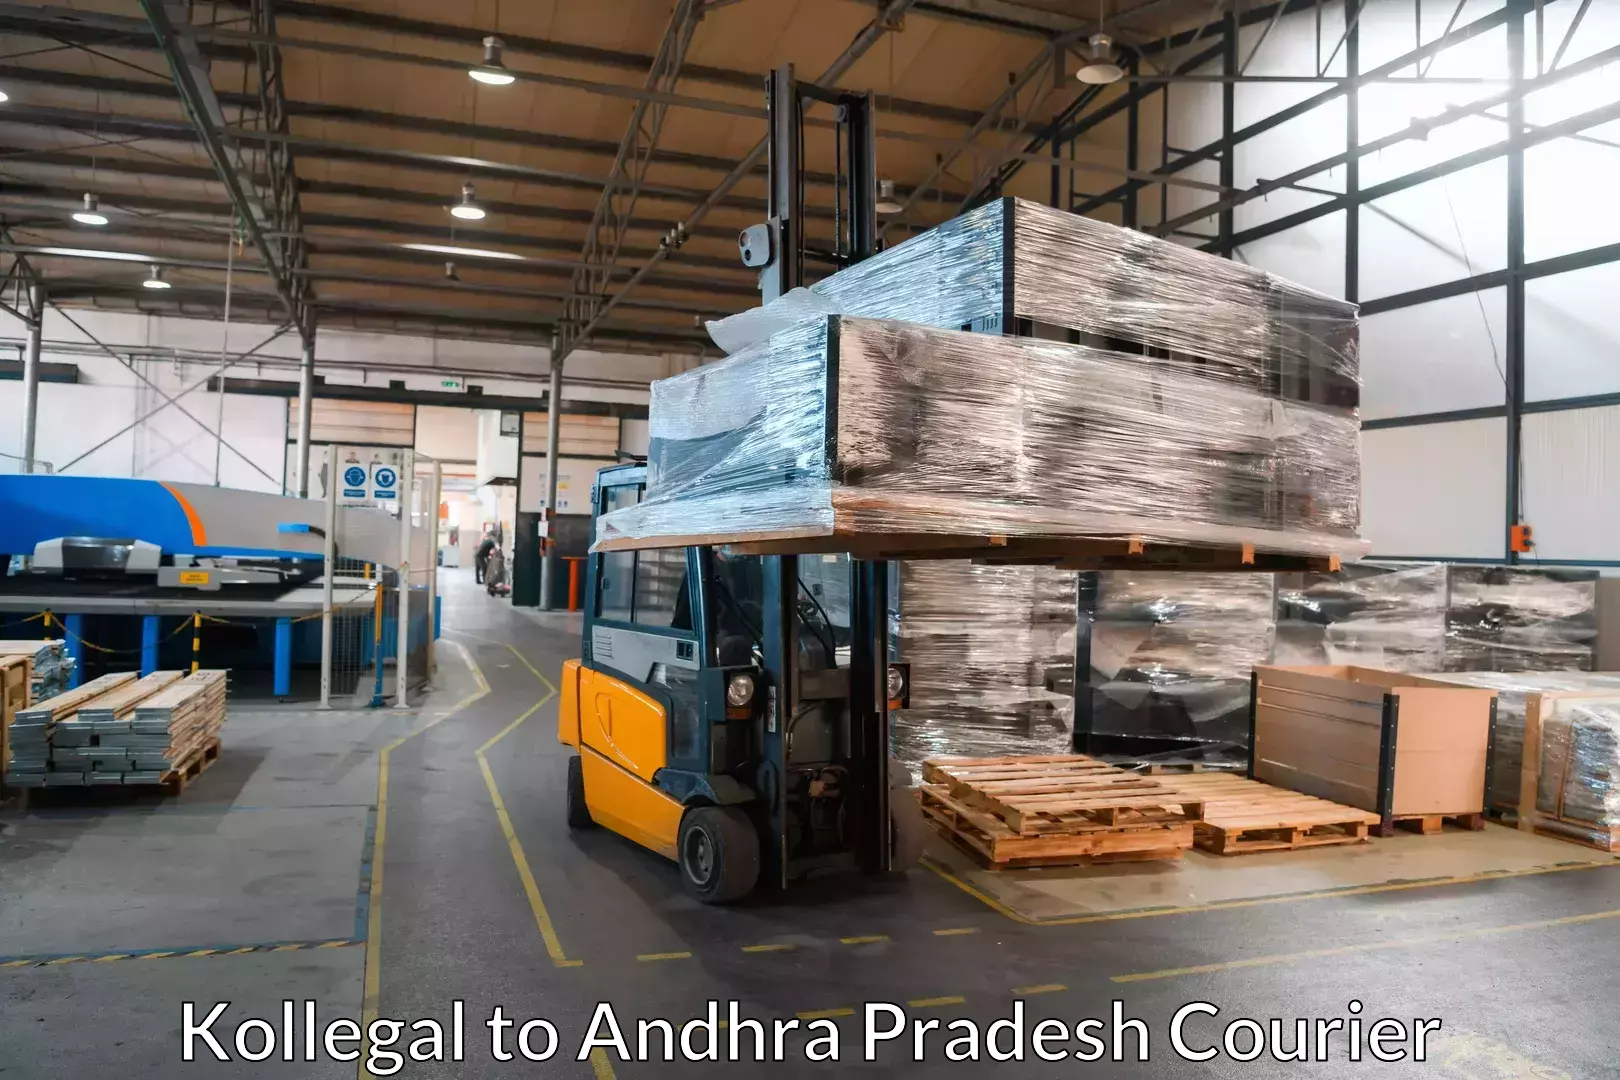 Trusted moving company Kollegal to Andhra Pradesh